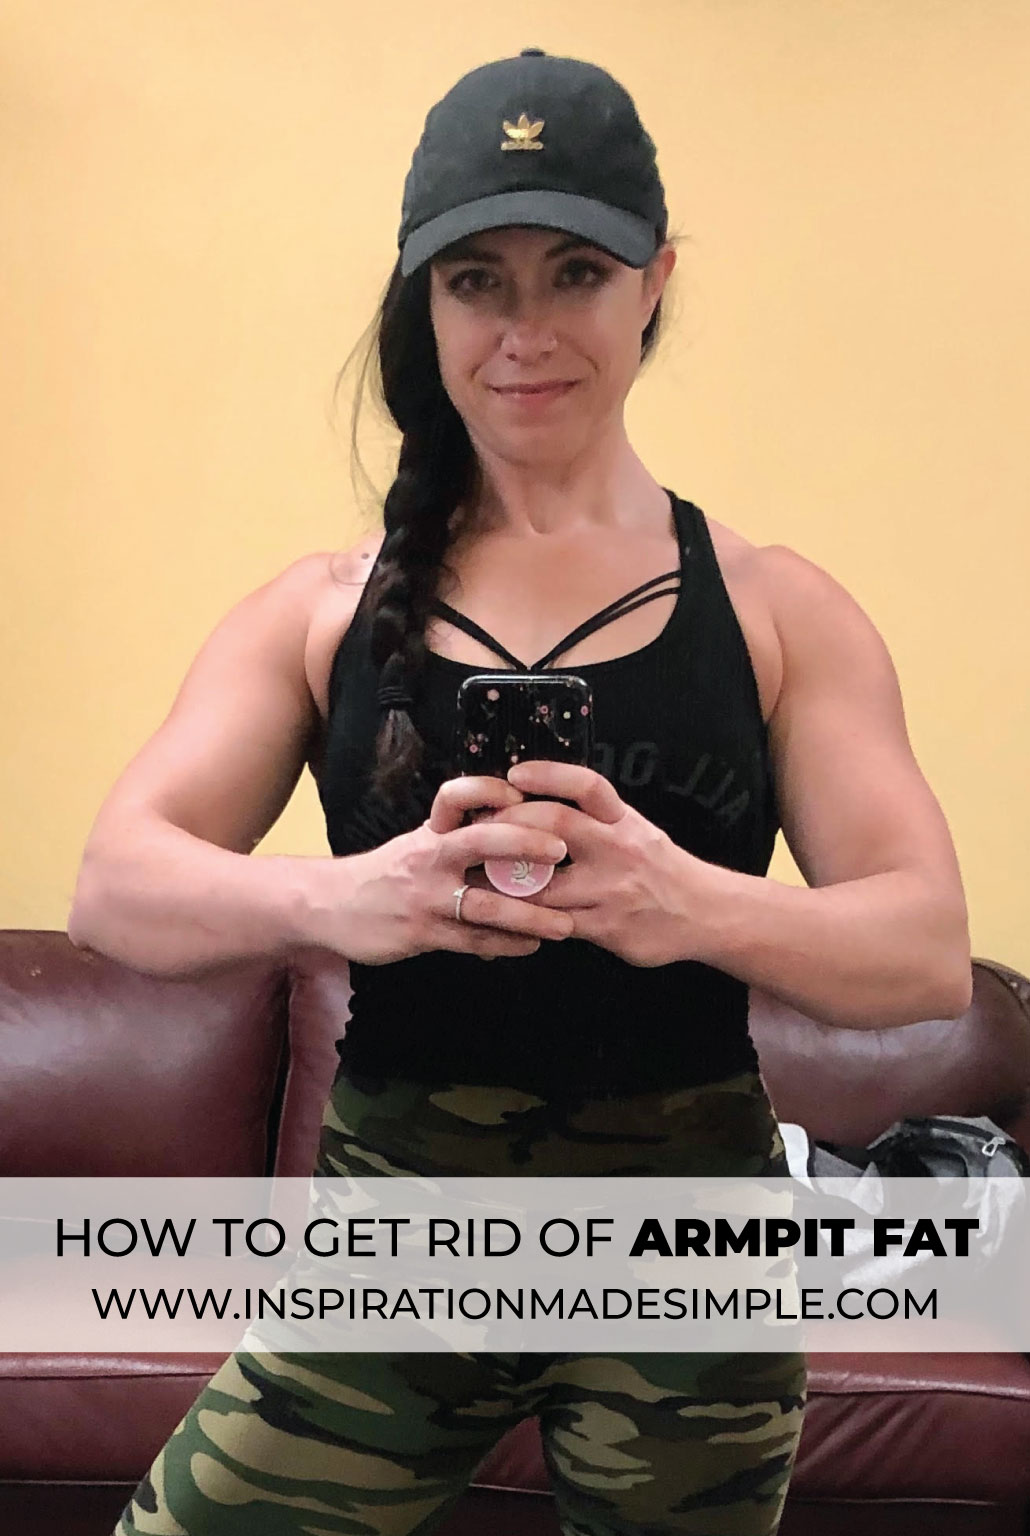 How to get rid of armpit fat